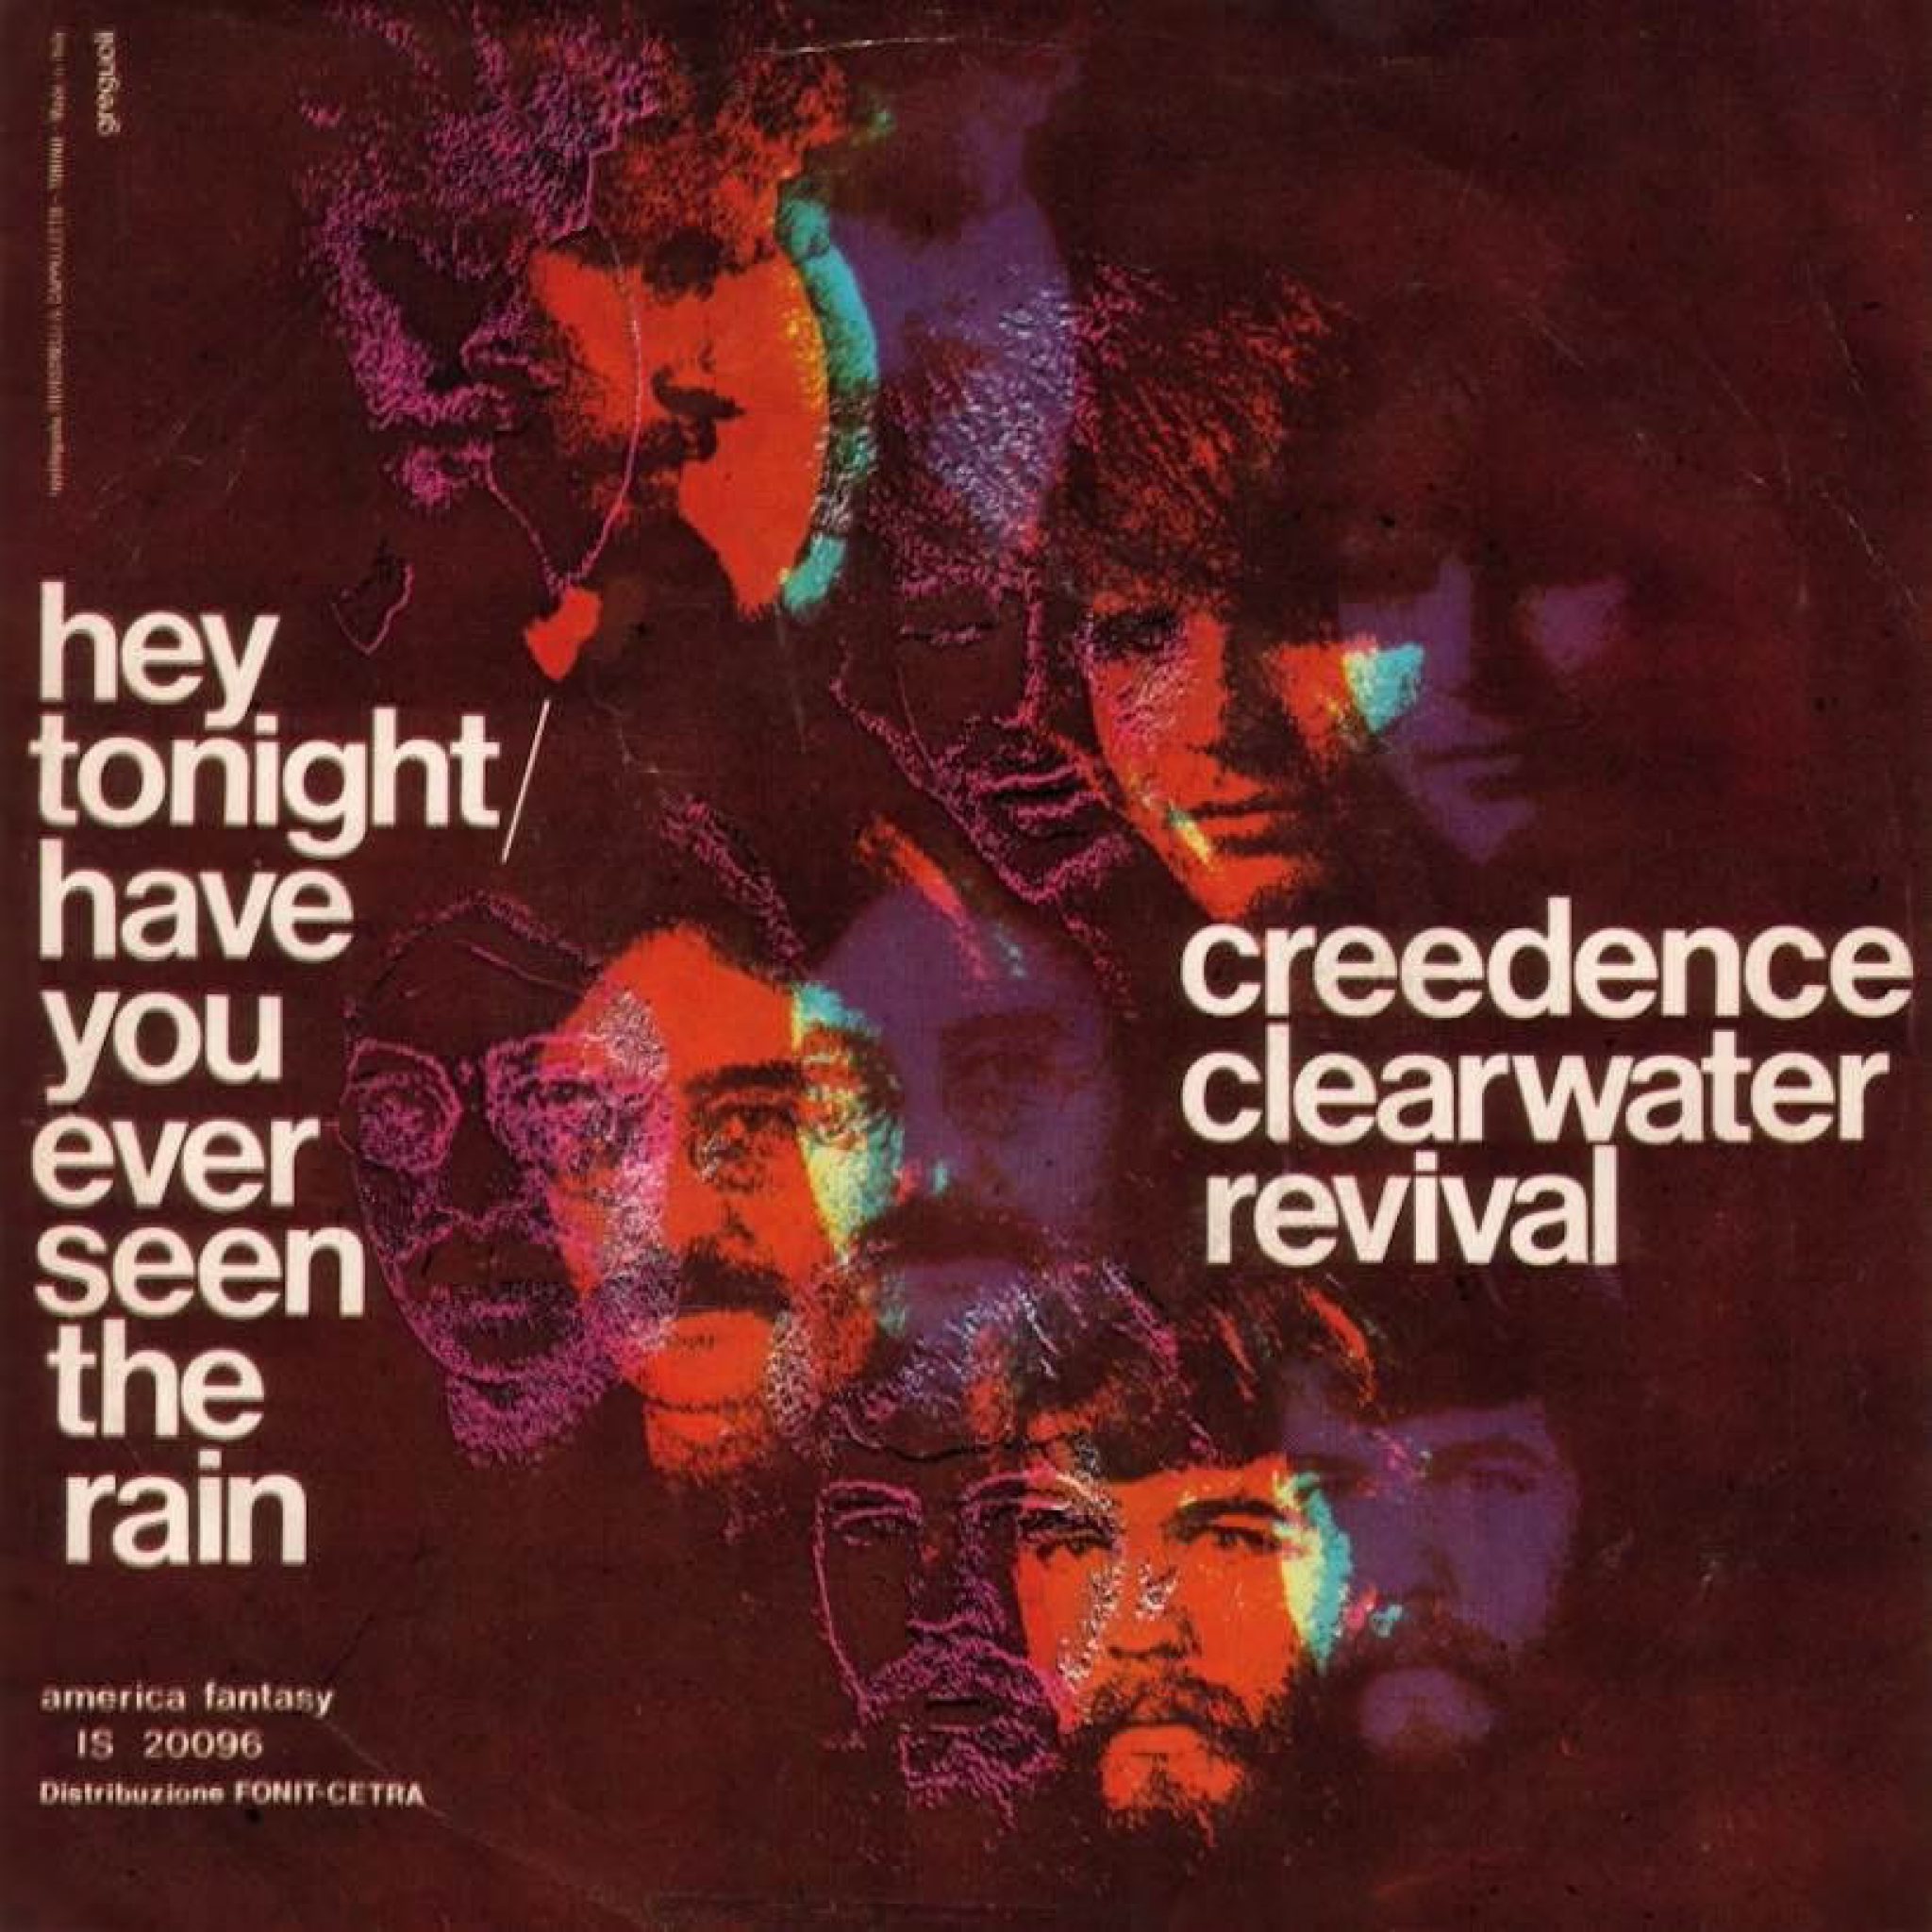 See the rain creedence. Creedence Clearwater Revival. Creedence Clearwater Revival - have you ever seen the Rain. Have you ever seen the Rain Криденс. Creedence Clearwater Revival - have you ever seen the Rain (1970).